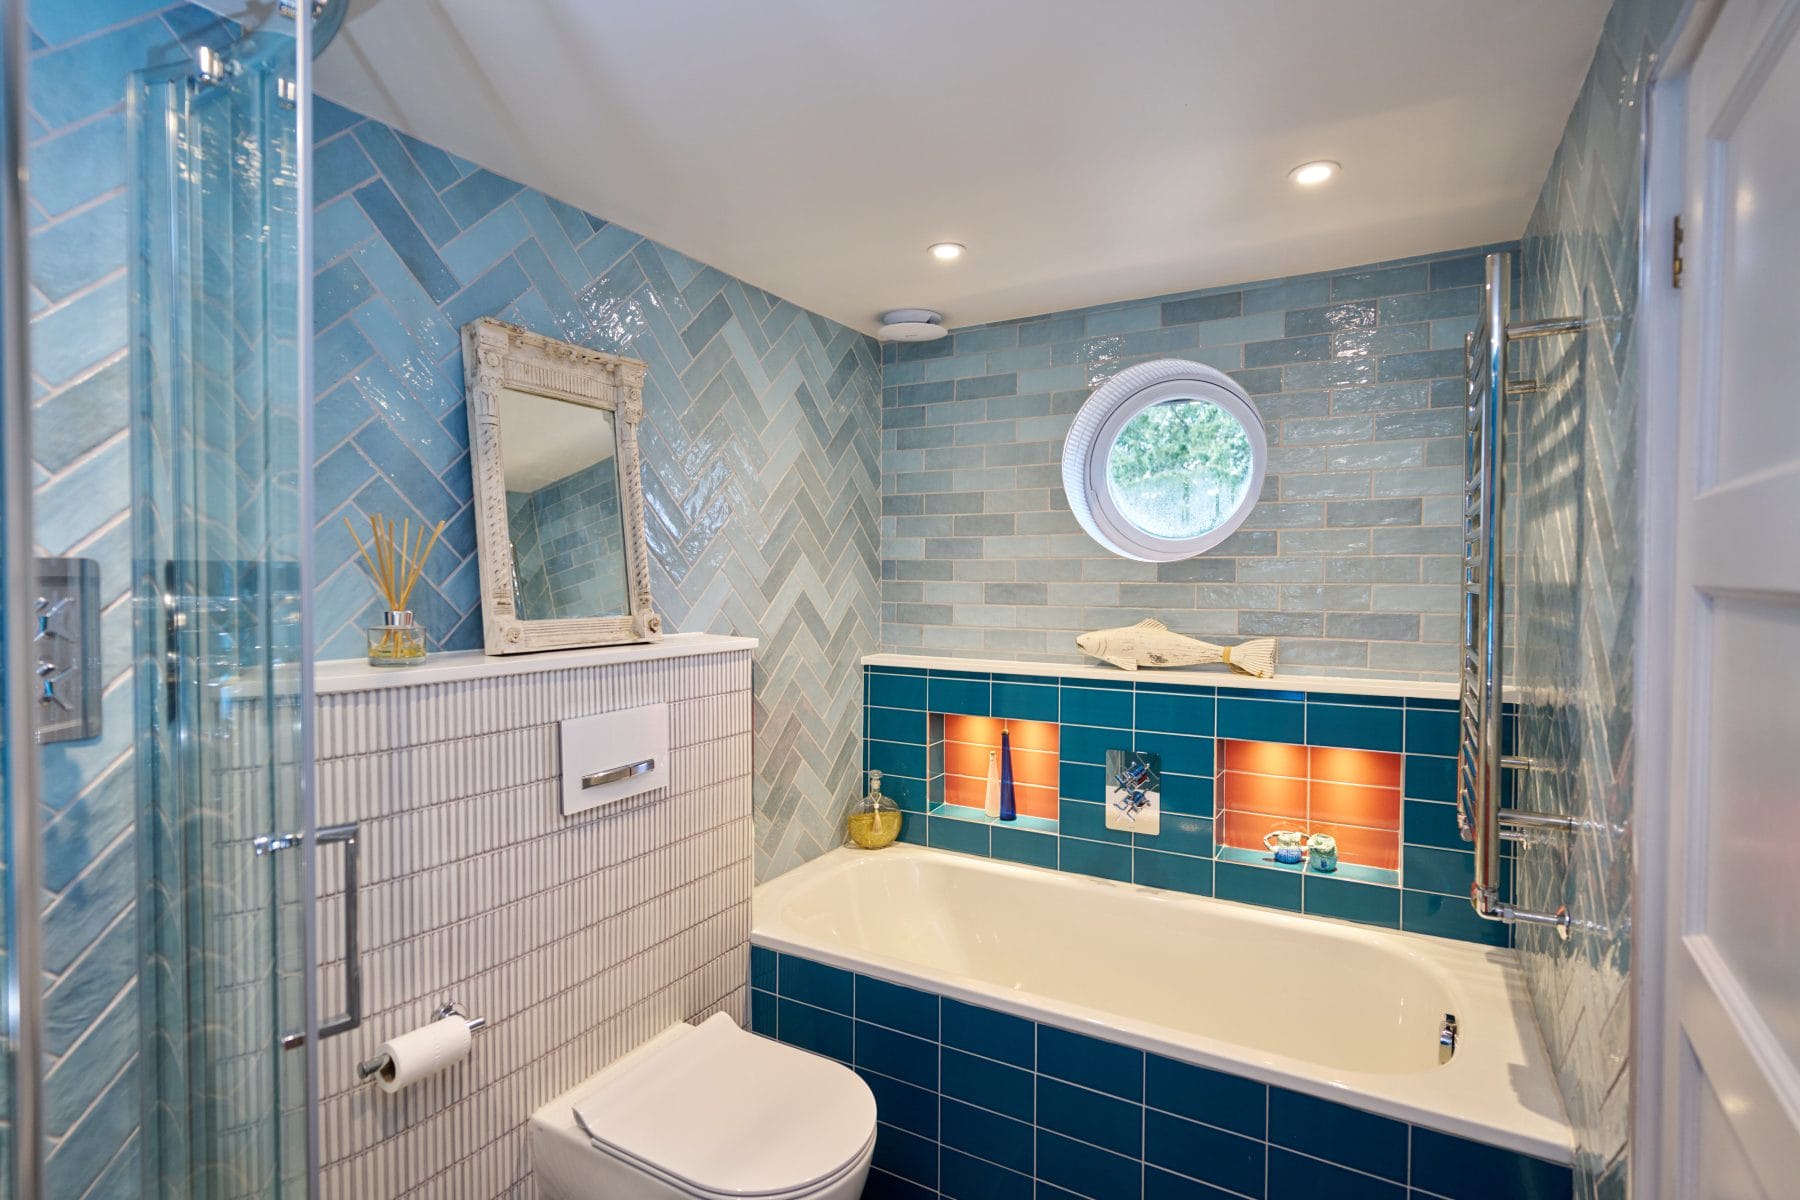 Bathroom Design in Handcross with Blue and Red Tiles